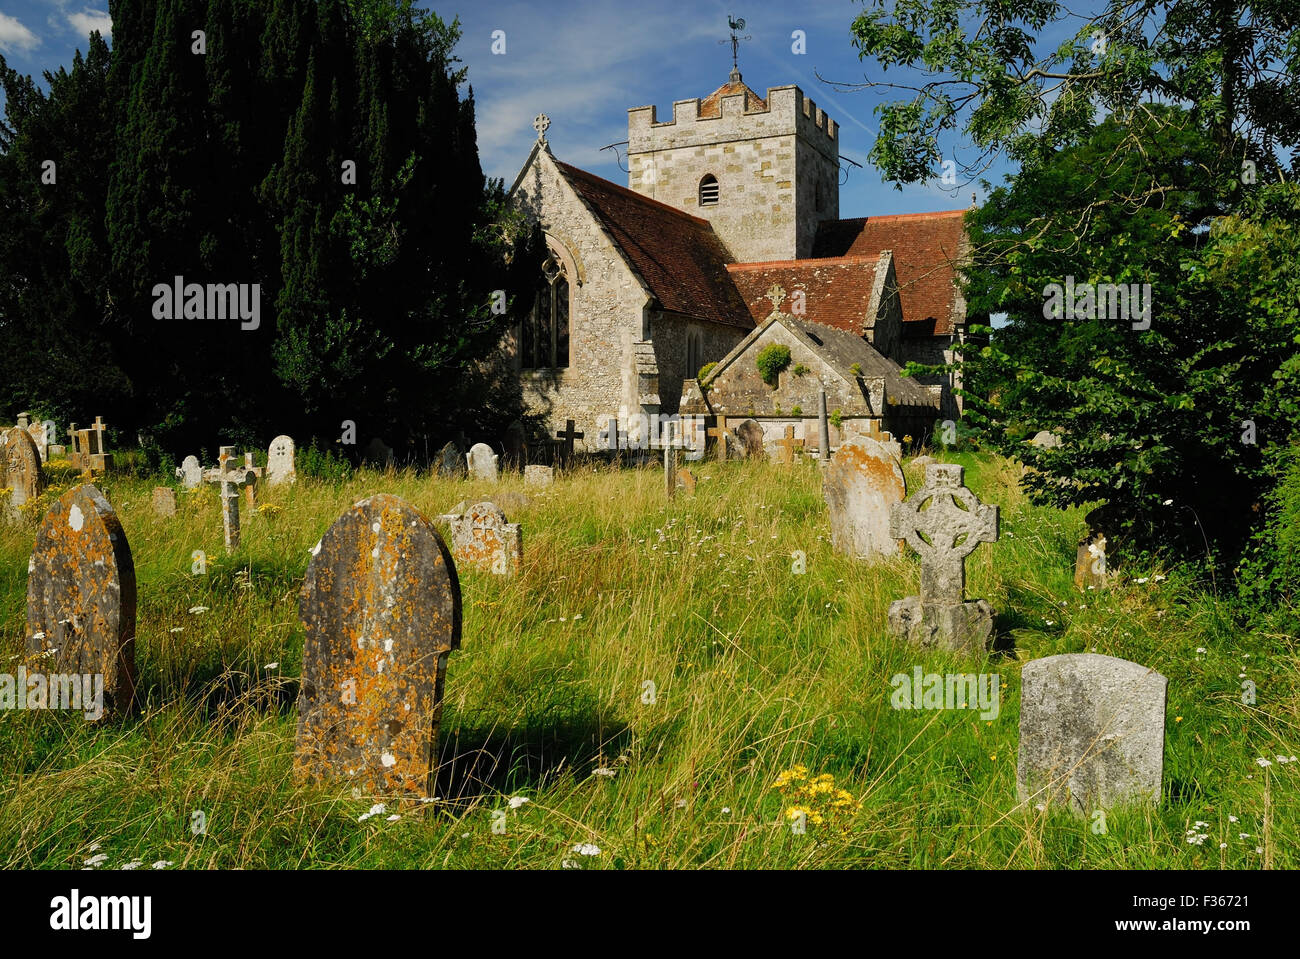 St Peter's church, Britford, Wiltshire. Stock Photo